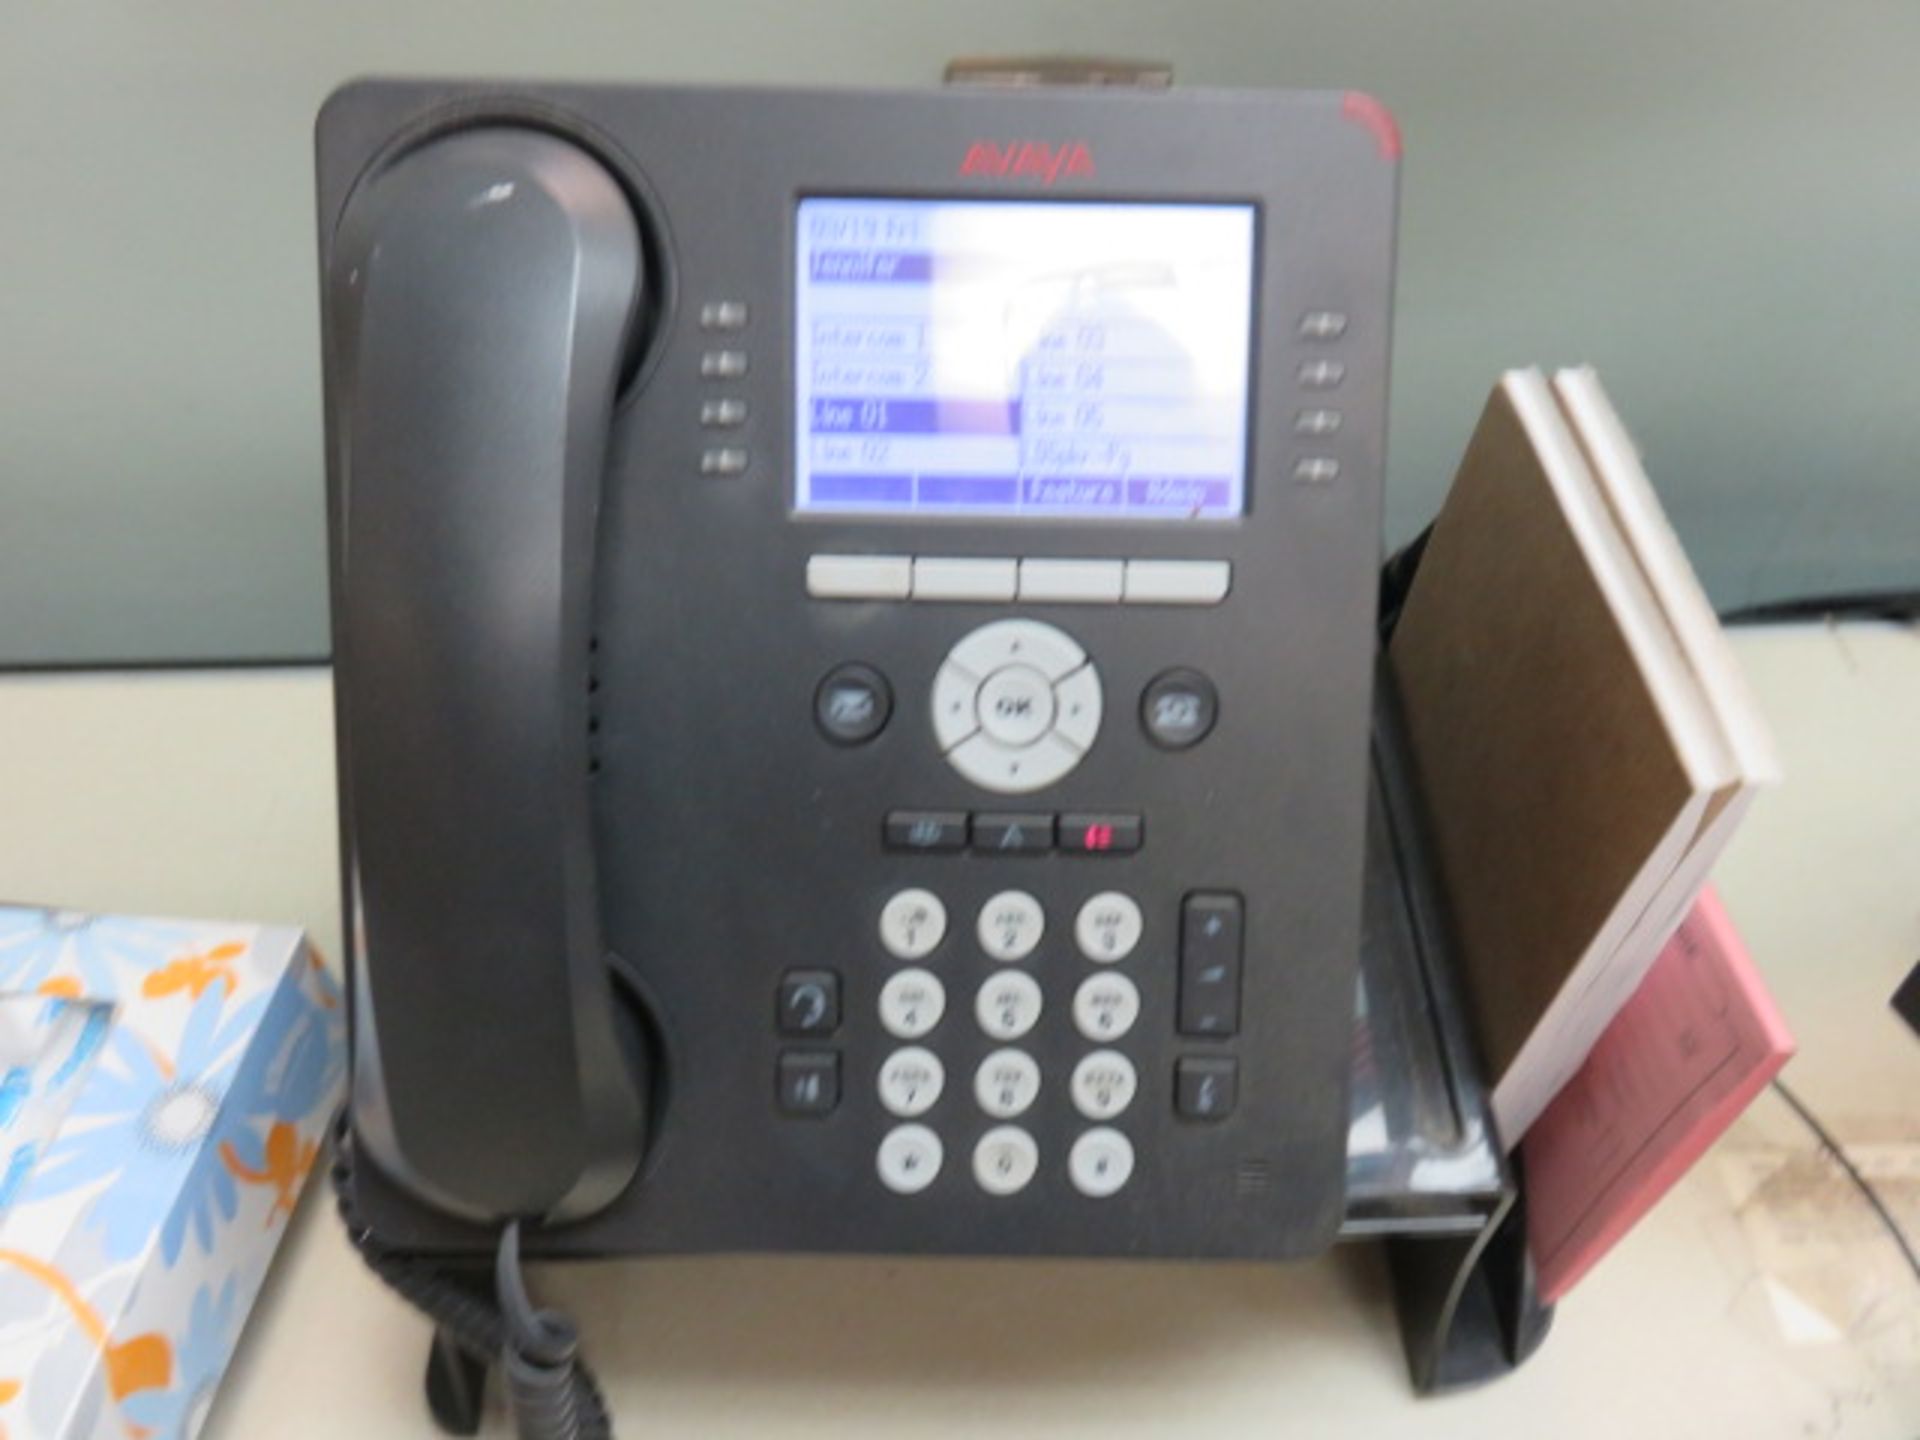 AVAYA PHONE SYSTEM W/ IP OFFICE 500 V2 and (16) 9508 TELEPHONES (MUST BE REMOVED APRIL 9TH) - Image 2 of 3